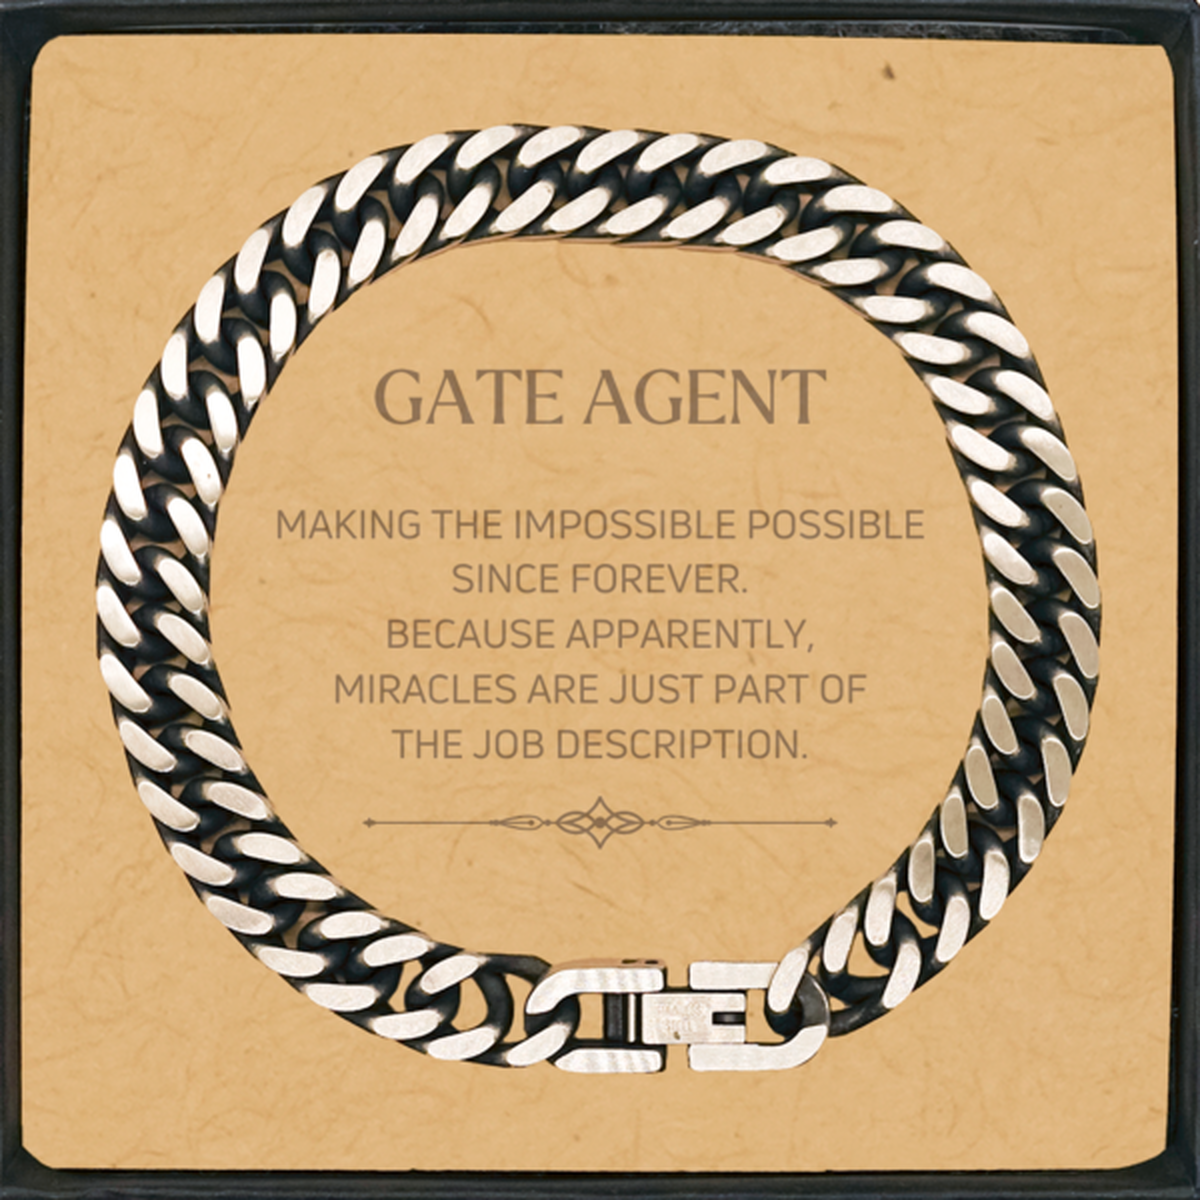 Funny Gate Agent Gifts, Miracles are just part of the job description, Inspirational Birthday Cuban Link Chain Bracelet For Gate Agent, Men, Women, Coworkers, Friends, Boss